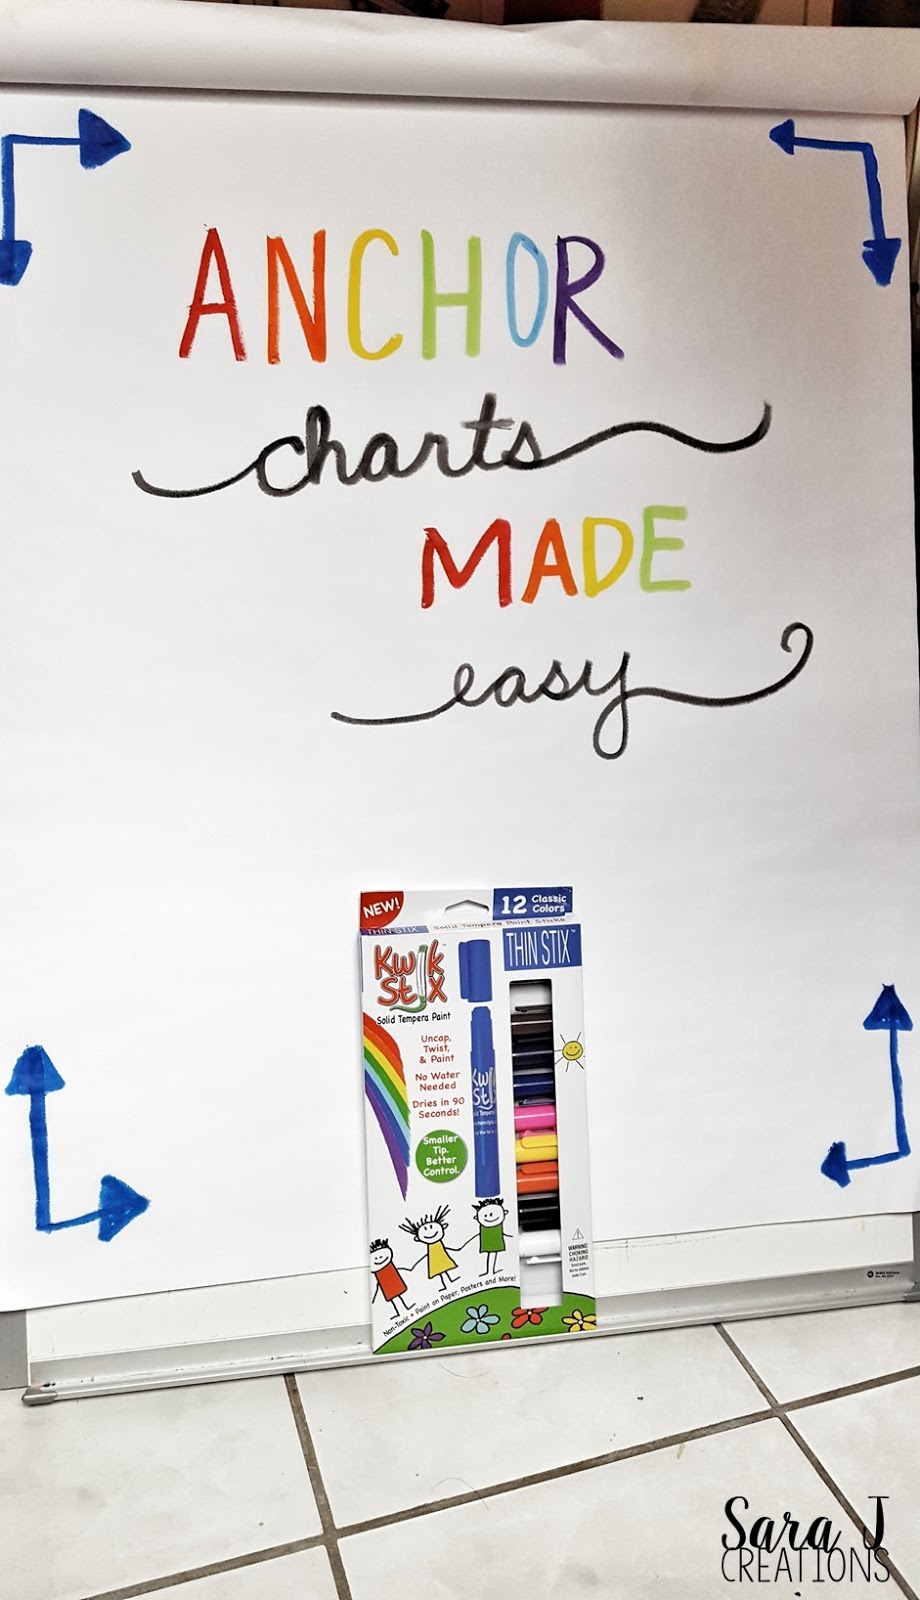 Posters and Projects Made Easy with Kwik Stix